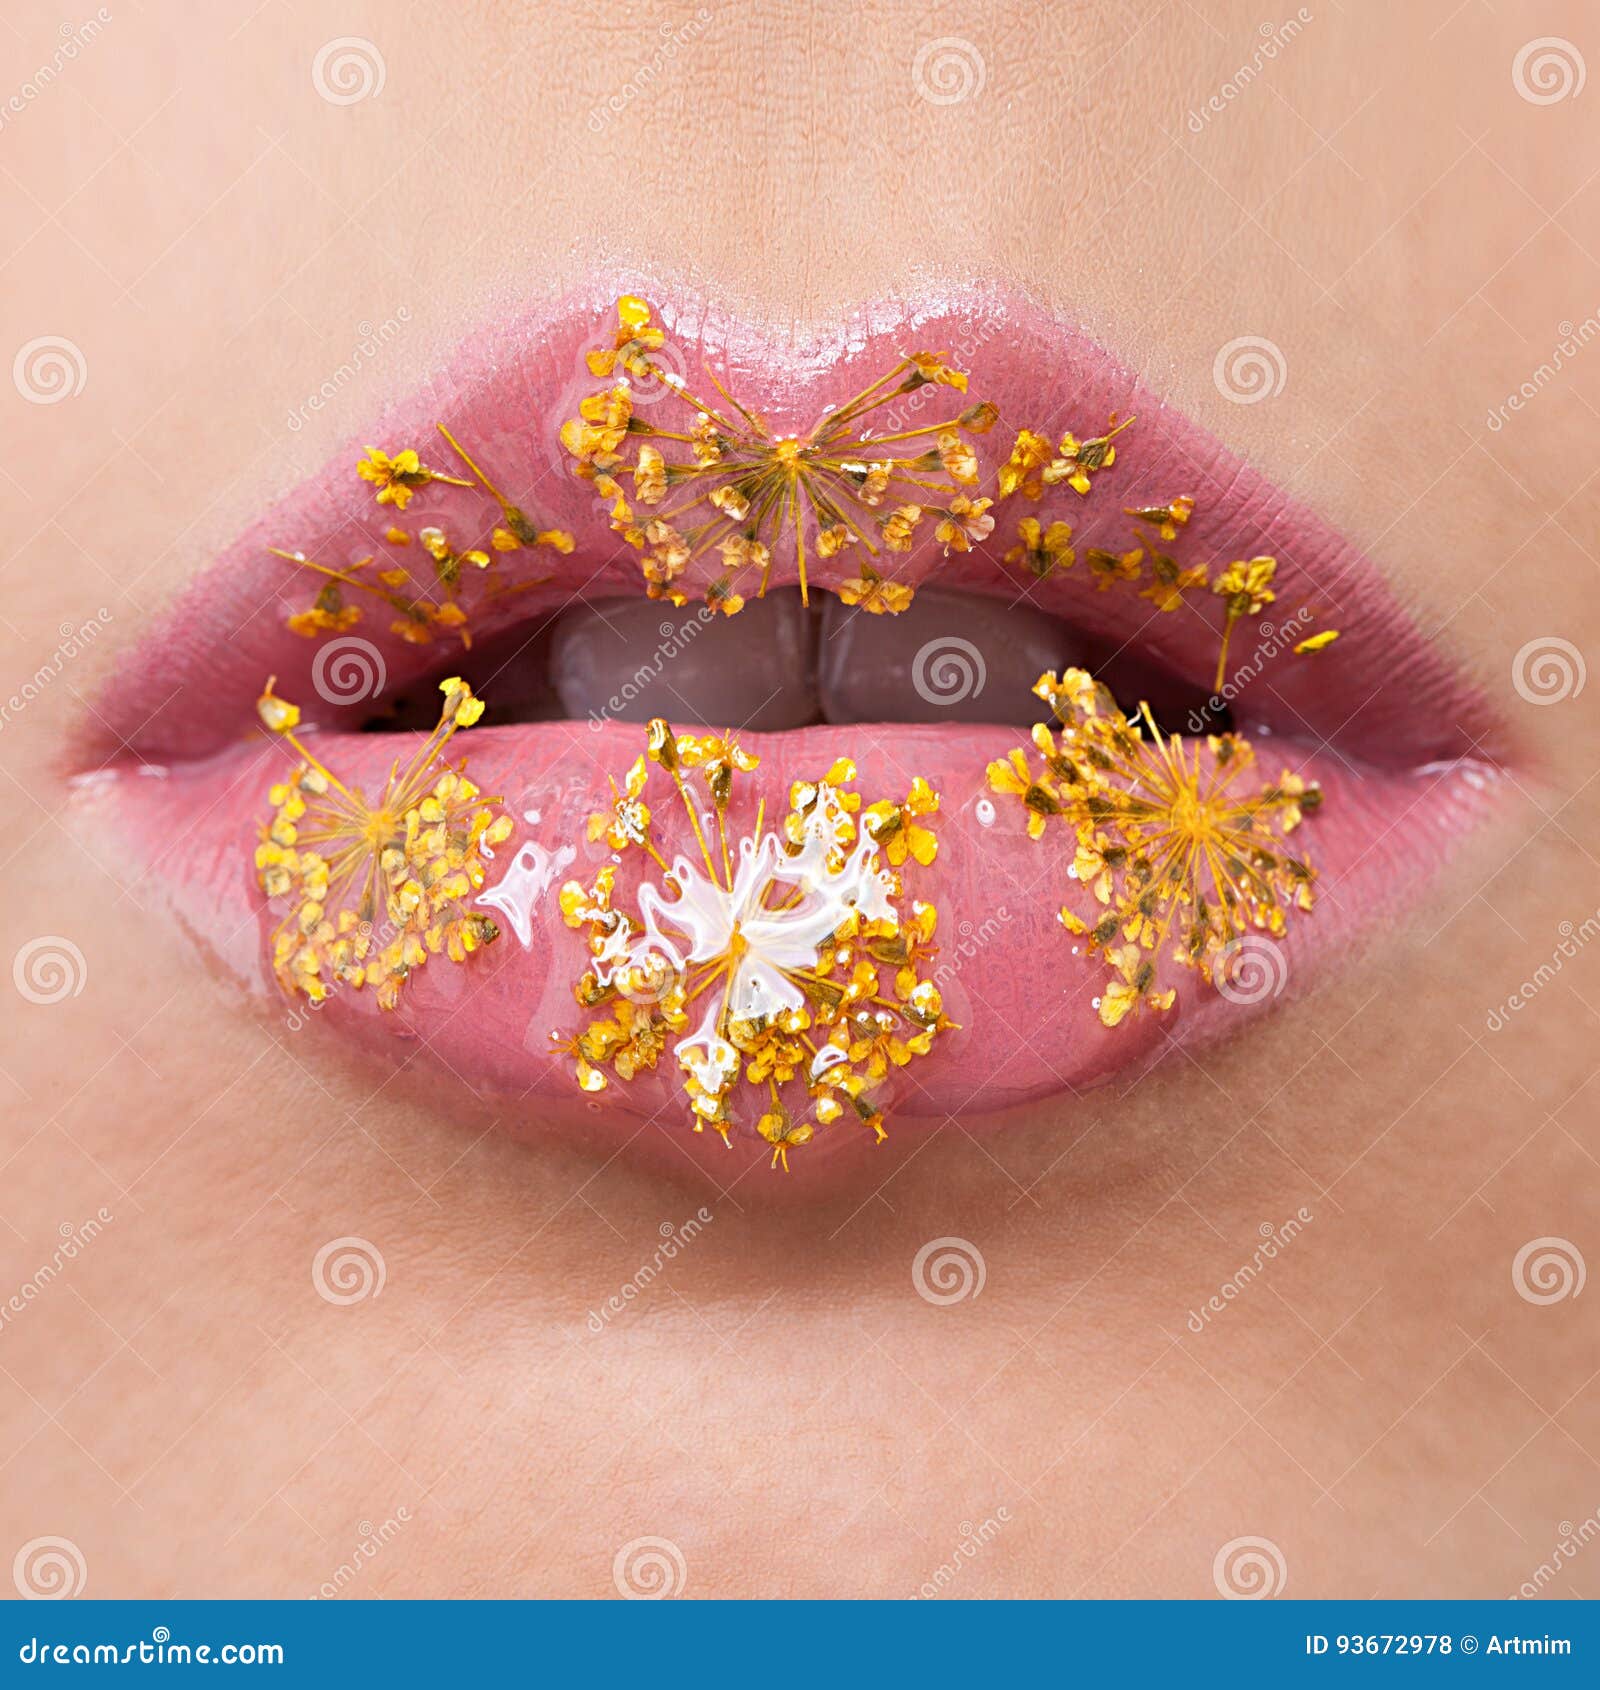 Download 88 Close Up Yellow Lip Gloss Photos Free Royalty Free Stock Photos From Dreamstime Yellowimages Mockups